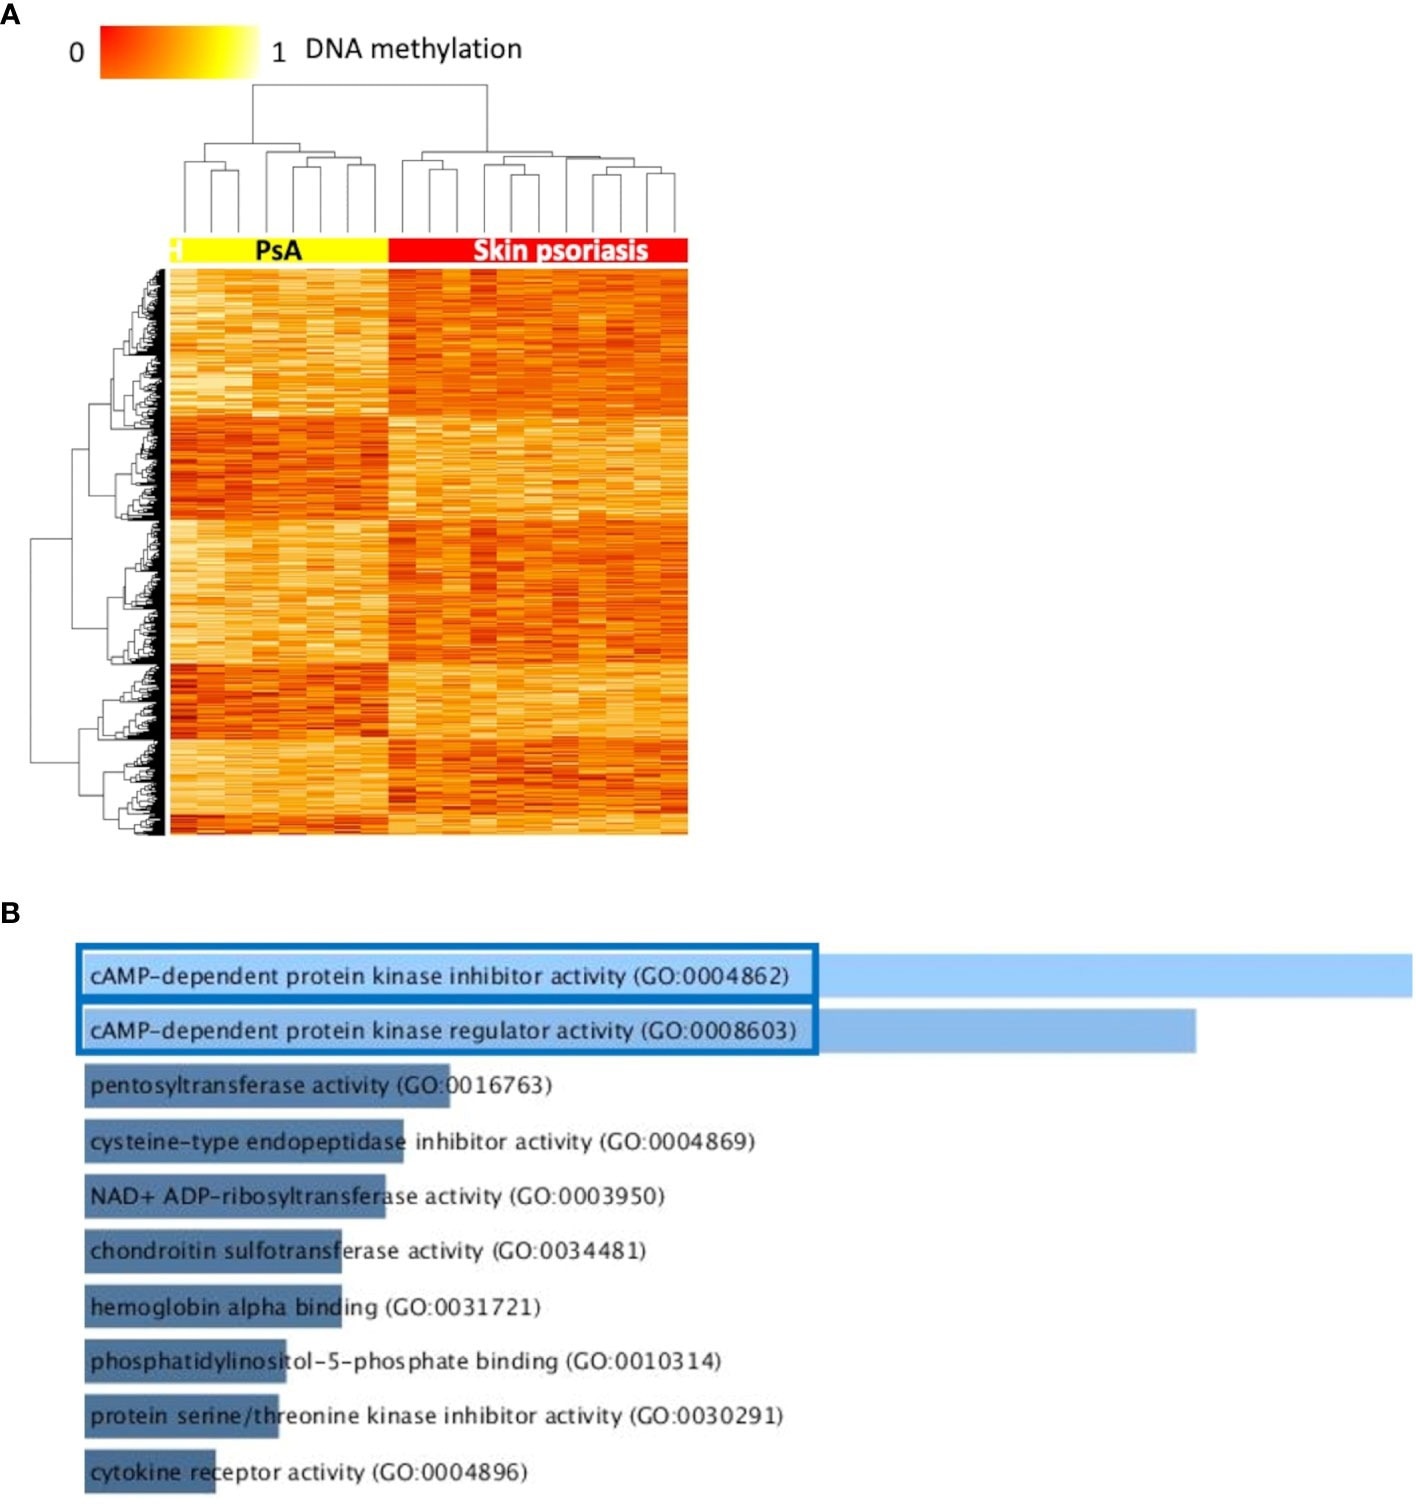 Differentially methylated CpGs differentiate skin psoriasis from PsA. (A) Heat map displaying differentially methylated positions (DMPs) between skin psoriasis and PsA (FDR < 0.05, |Δβ| > 0.1). Normalized DNA methylation levels are displayed on the top left with red indicating reduced methylation and yellow indicating increased methylation levels. (B) Bar diagrams depict the results of Gene Ontology (GO) analysis of hypomethylated genes which presented at least one DMP in their promoter. Top 10 GO terms are represented, and the statistically significant pathways are framed in blue.